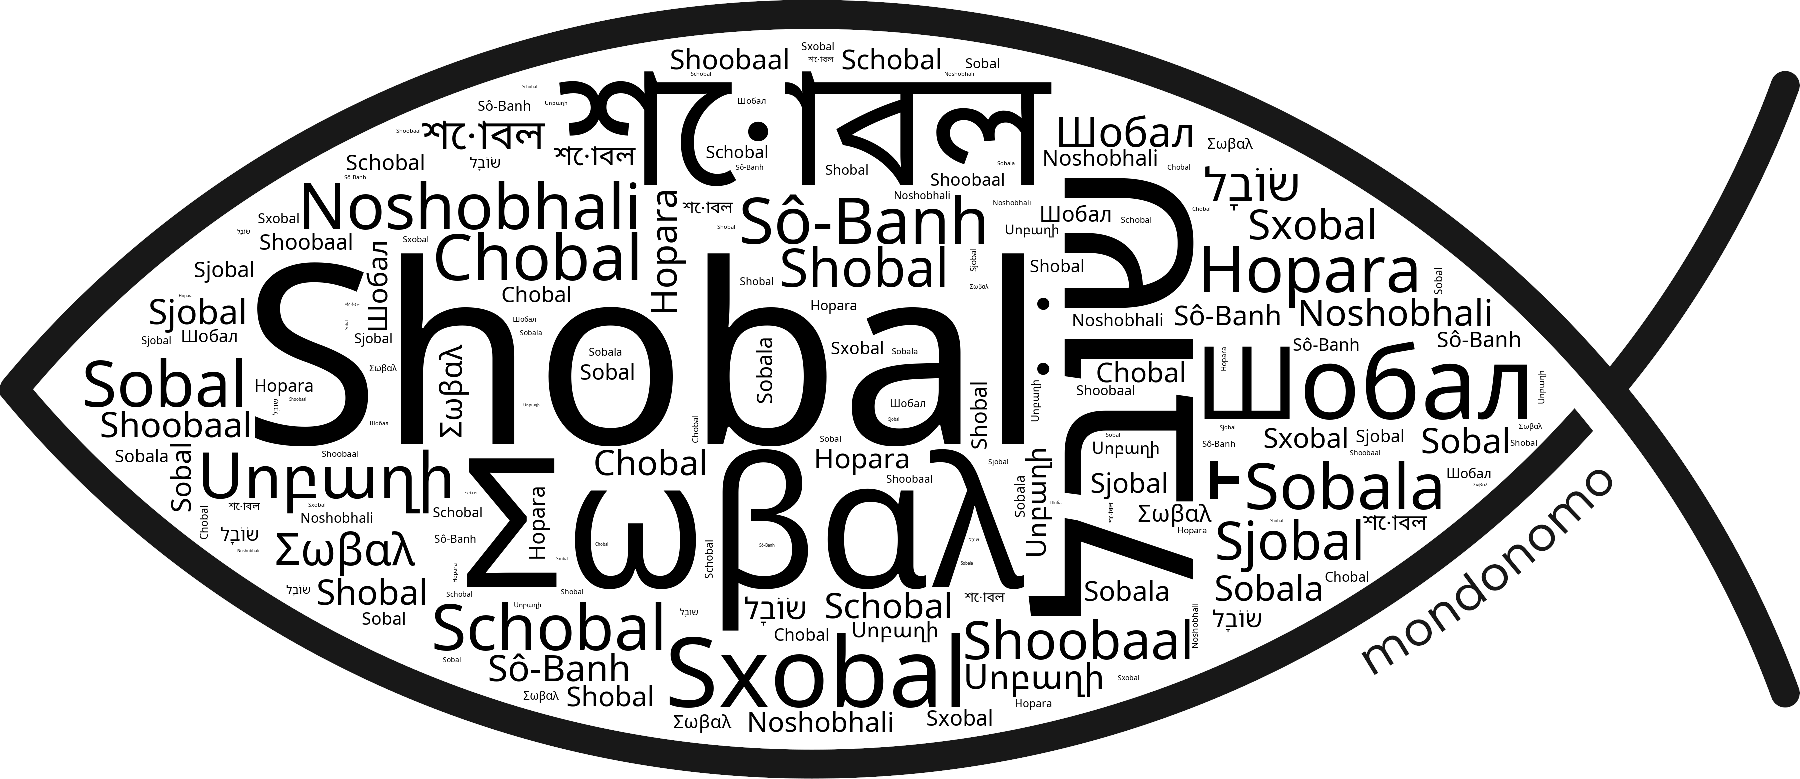 Name Shobal in the world's Bibles